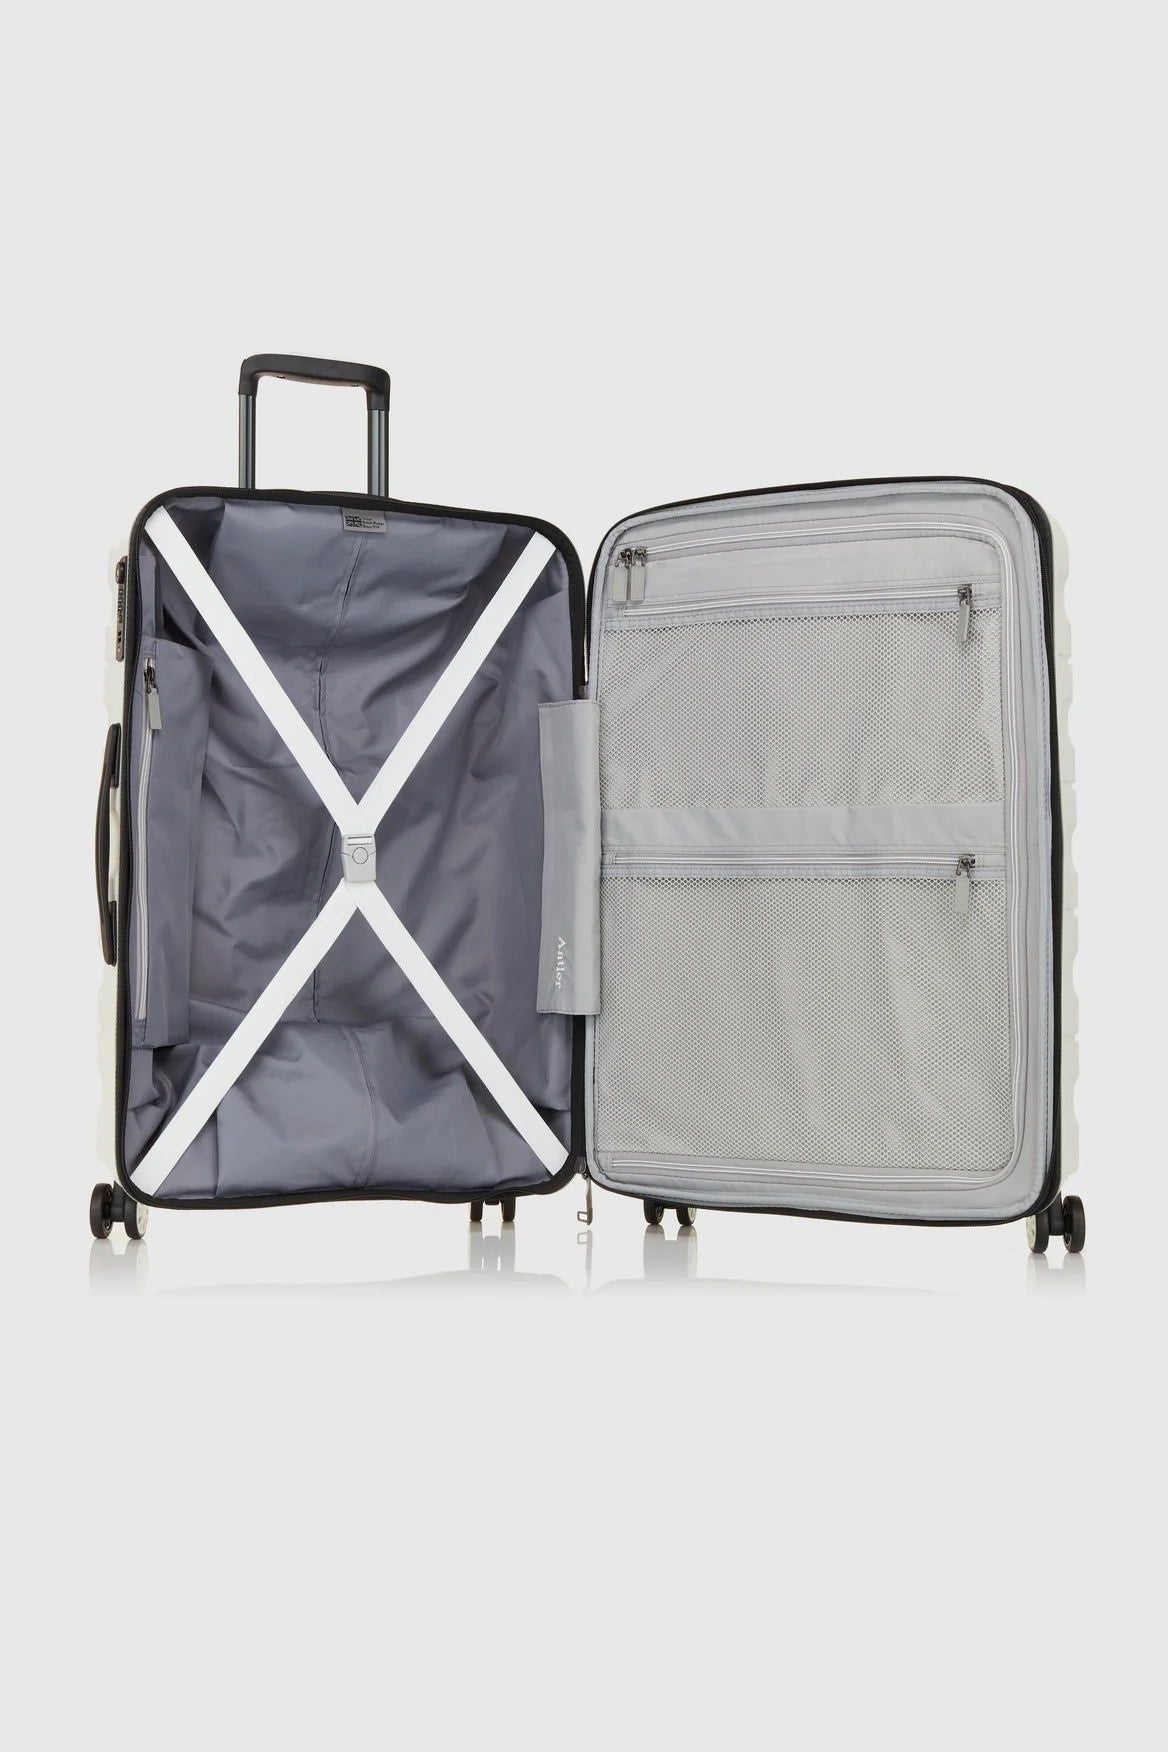 Antler Lincoln 56cm Carry On Hardsided Luggage - White - rainbowbags